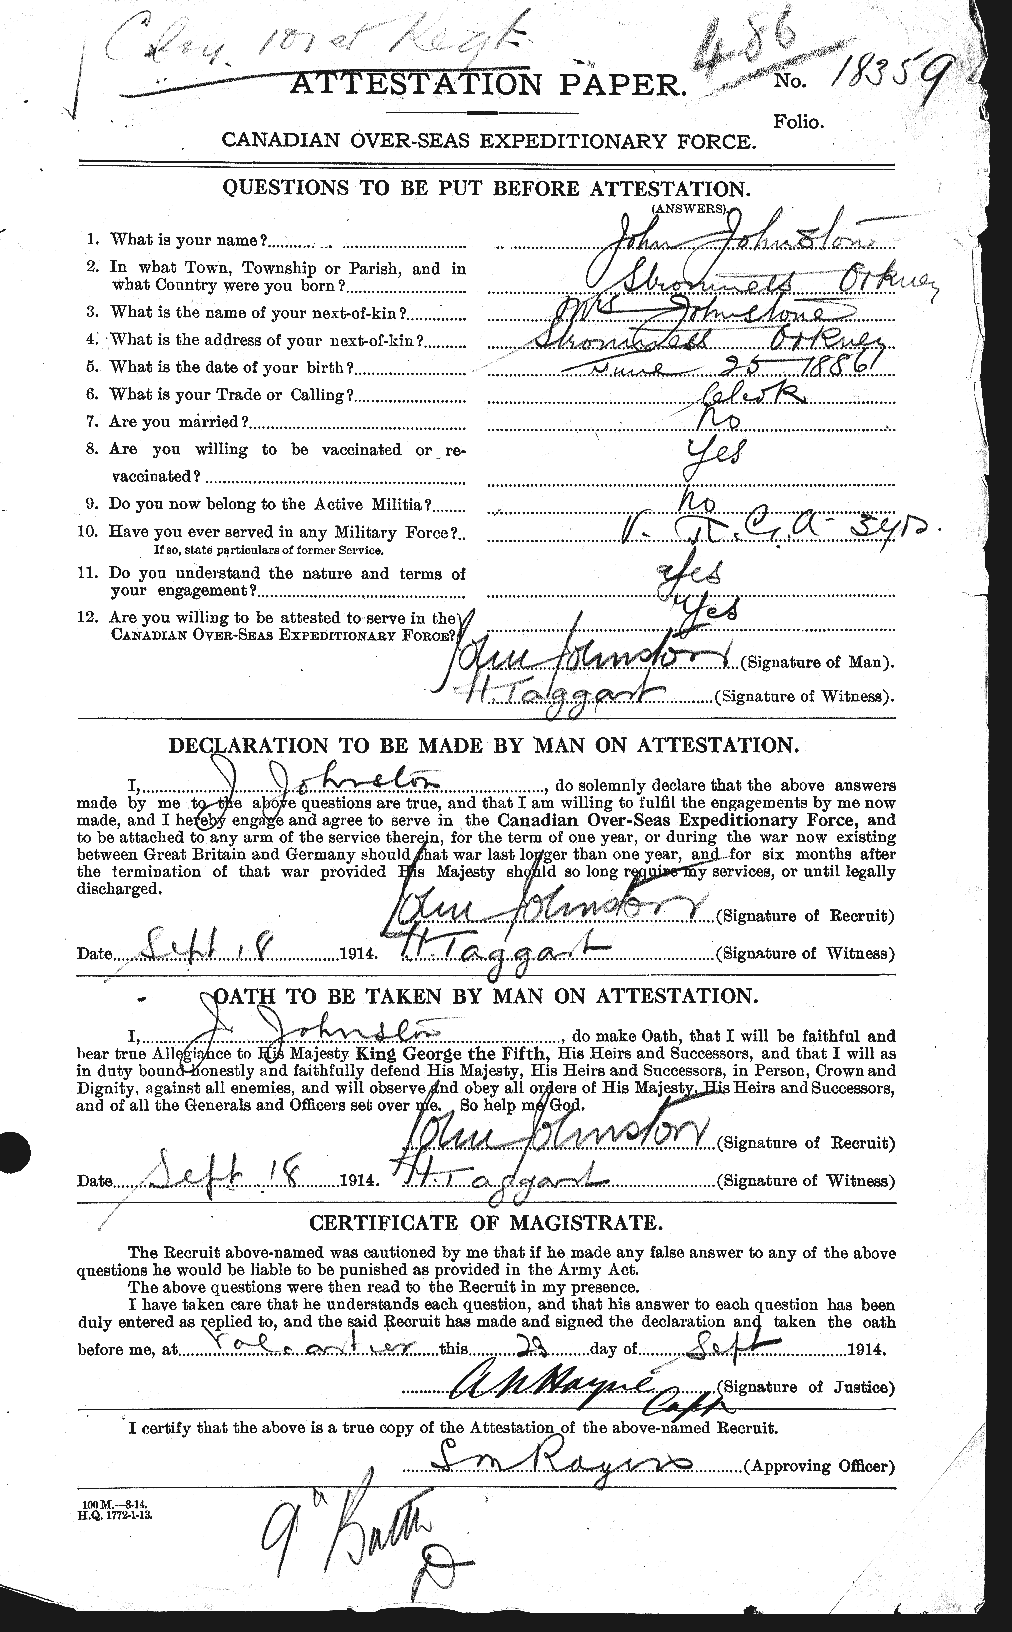 Personnel Records of the First World War - CEF 422795a